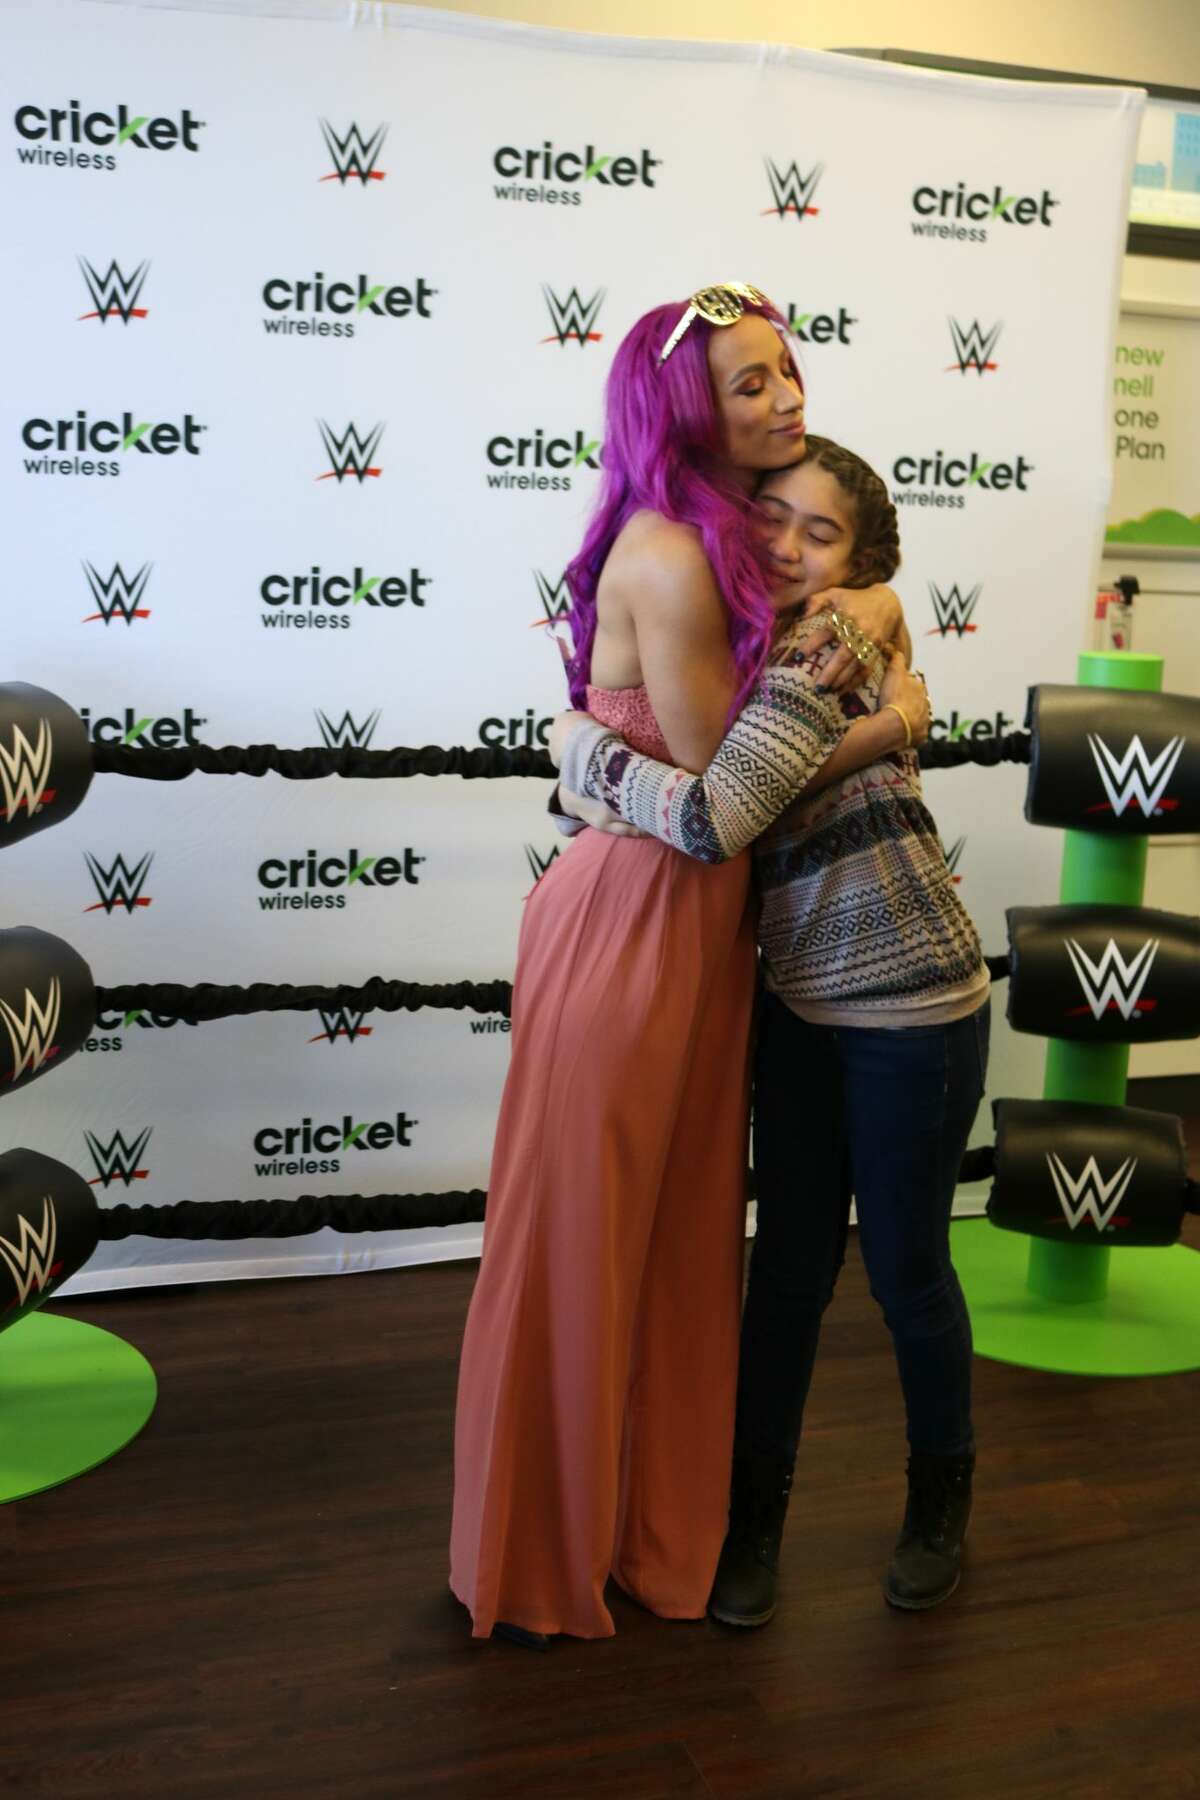 WWE superstar Sasha Banks presents tickets to the Royal Rumble to Zoe Robalino. Robalino was at a promotional event to meet banks and was randomly selected to win tickets to the WWE event at the Alamodome Sunday night.